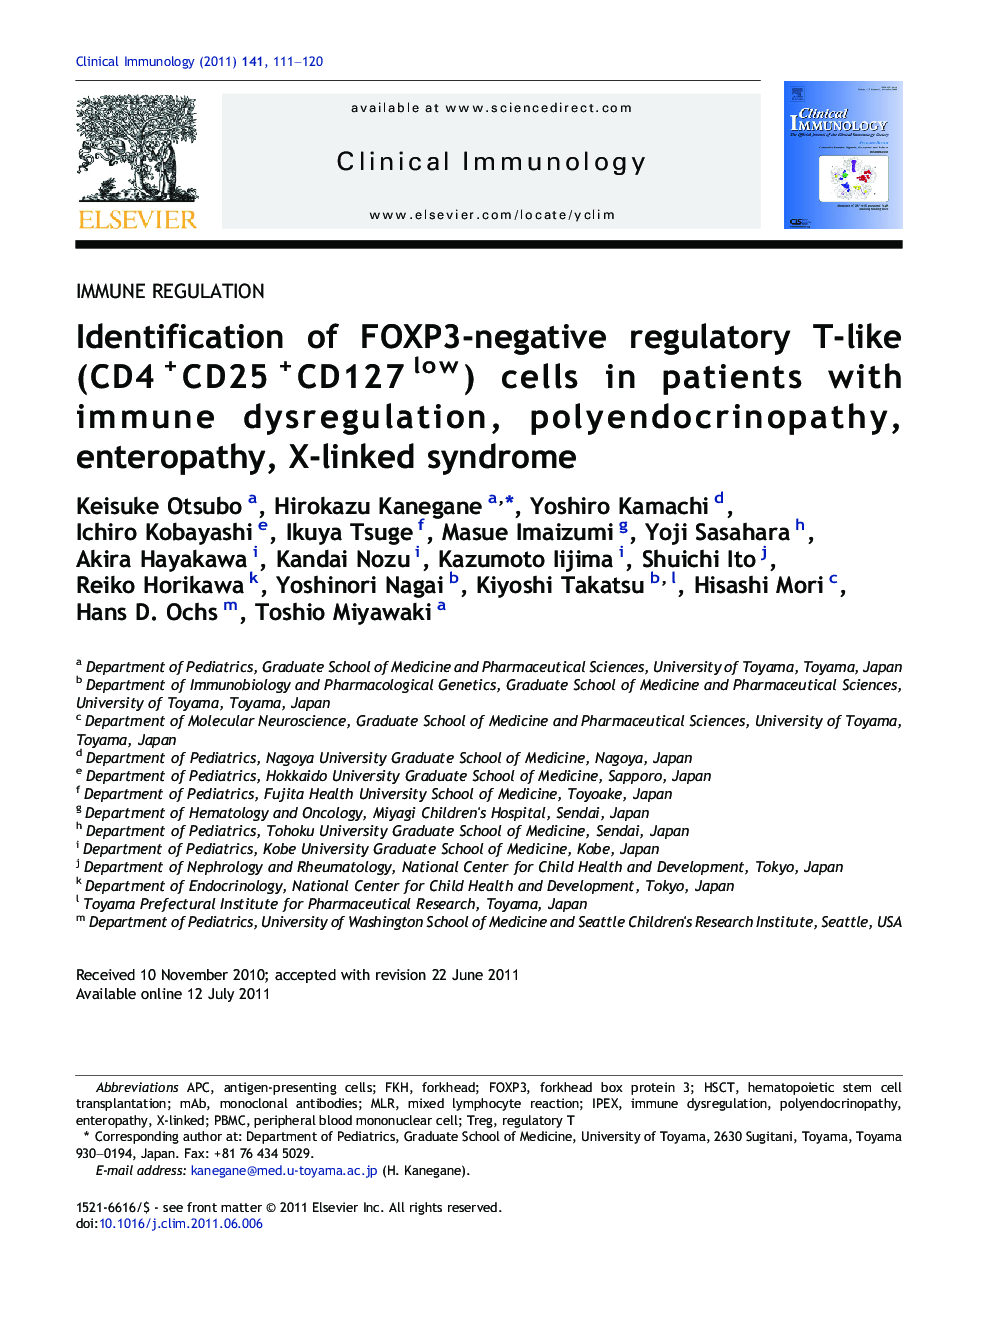 IMMUNE REGULATIONIdentification of FOXP3-negative regulatory T-like (CD4+CD25+CD127low) cells in patients with immune dysregulation, polyendocrinopathy, enteropathy, X-linked syndrome